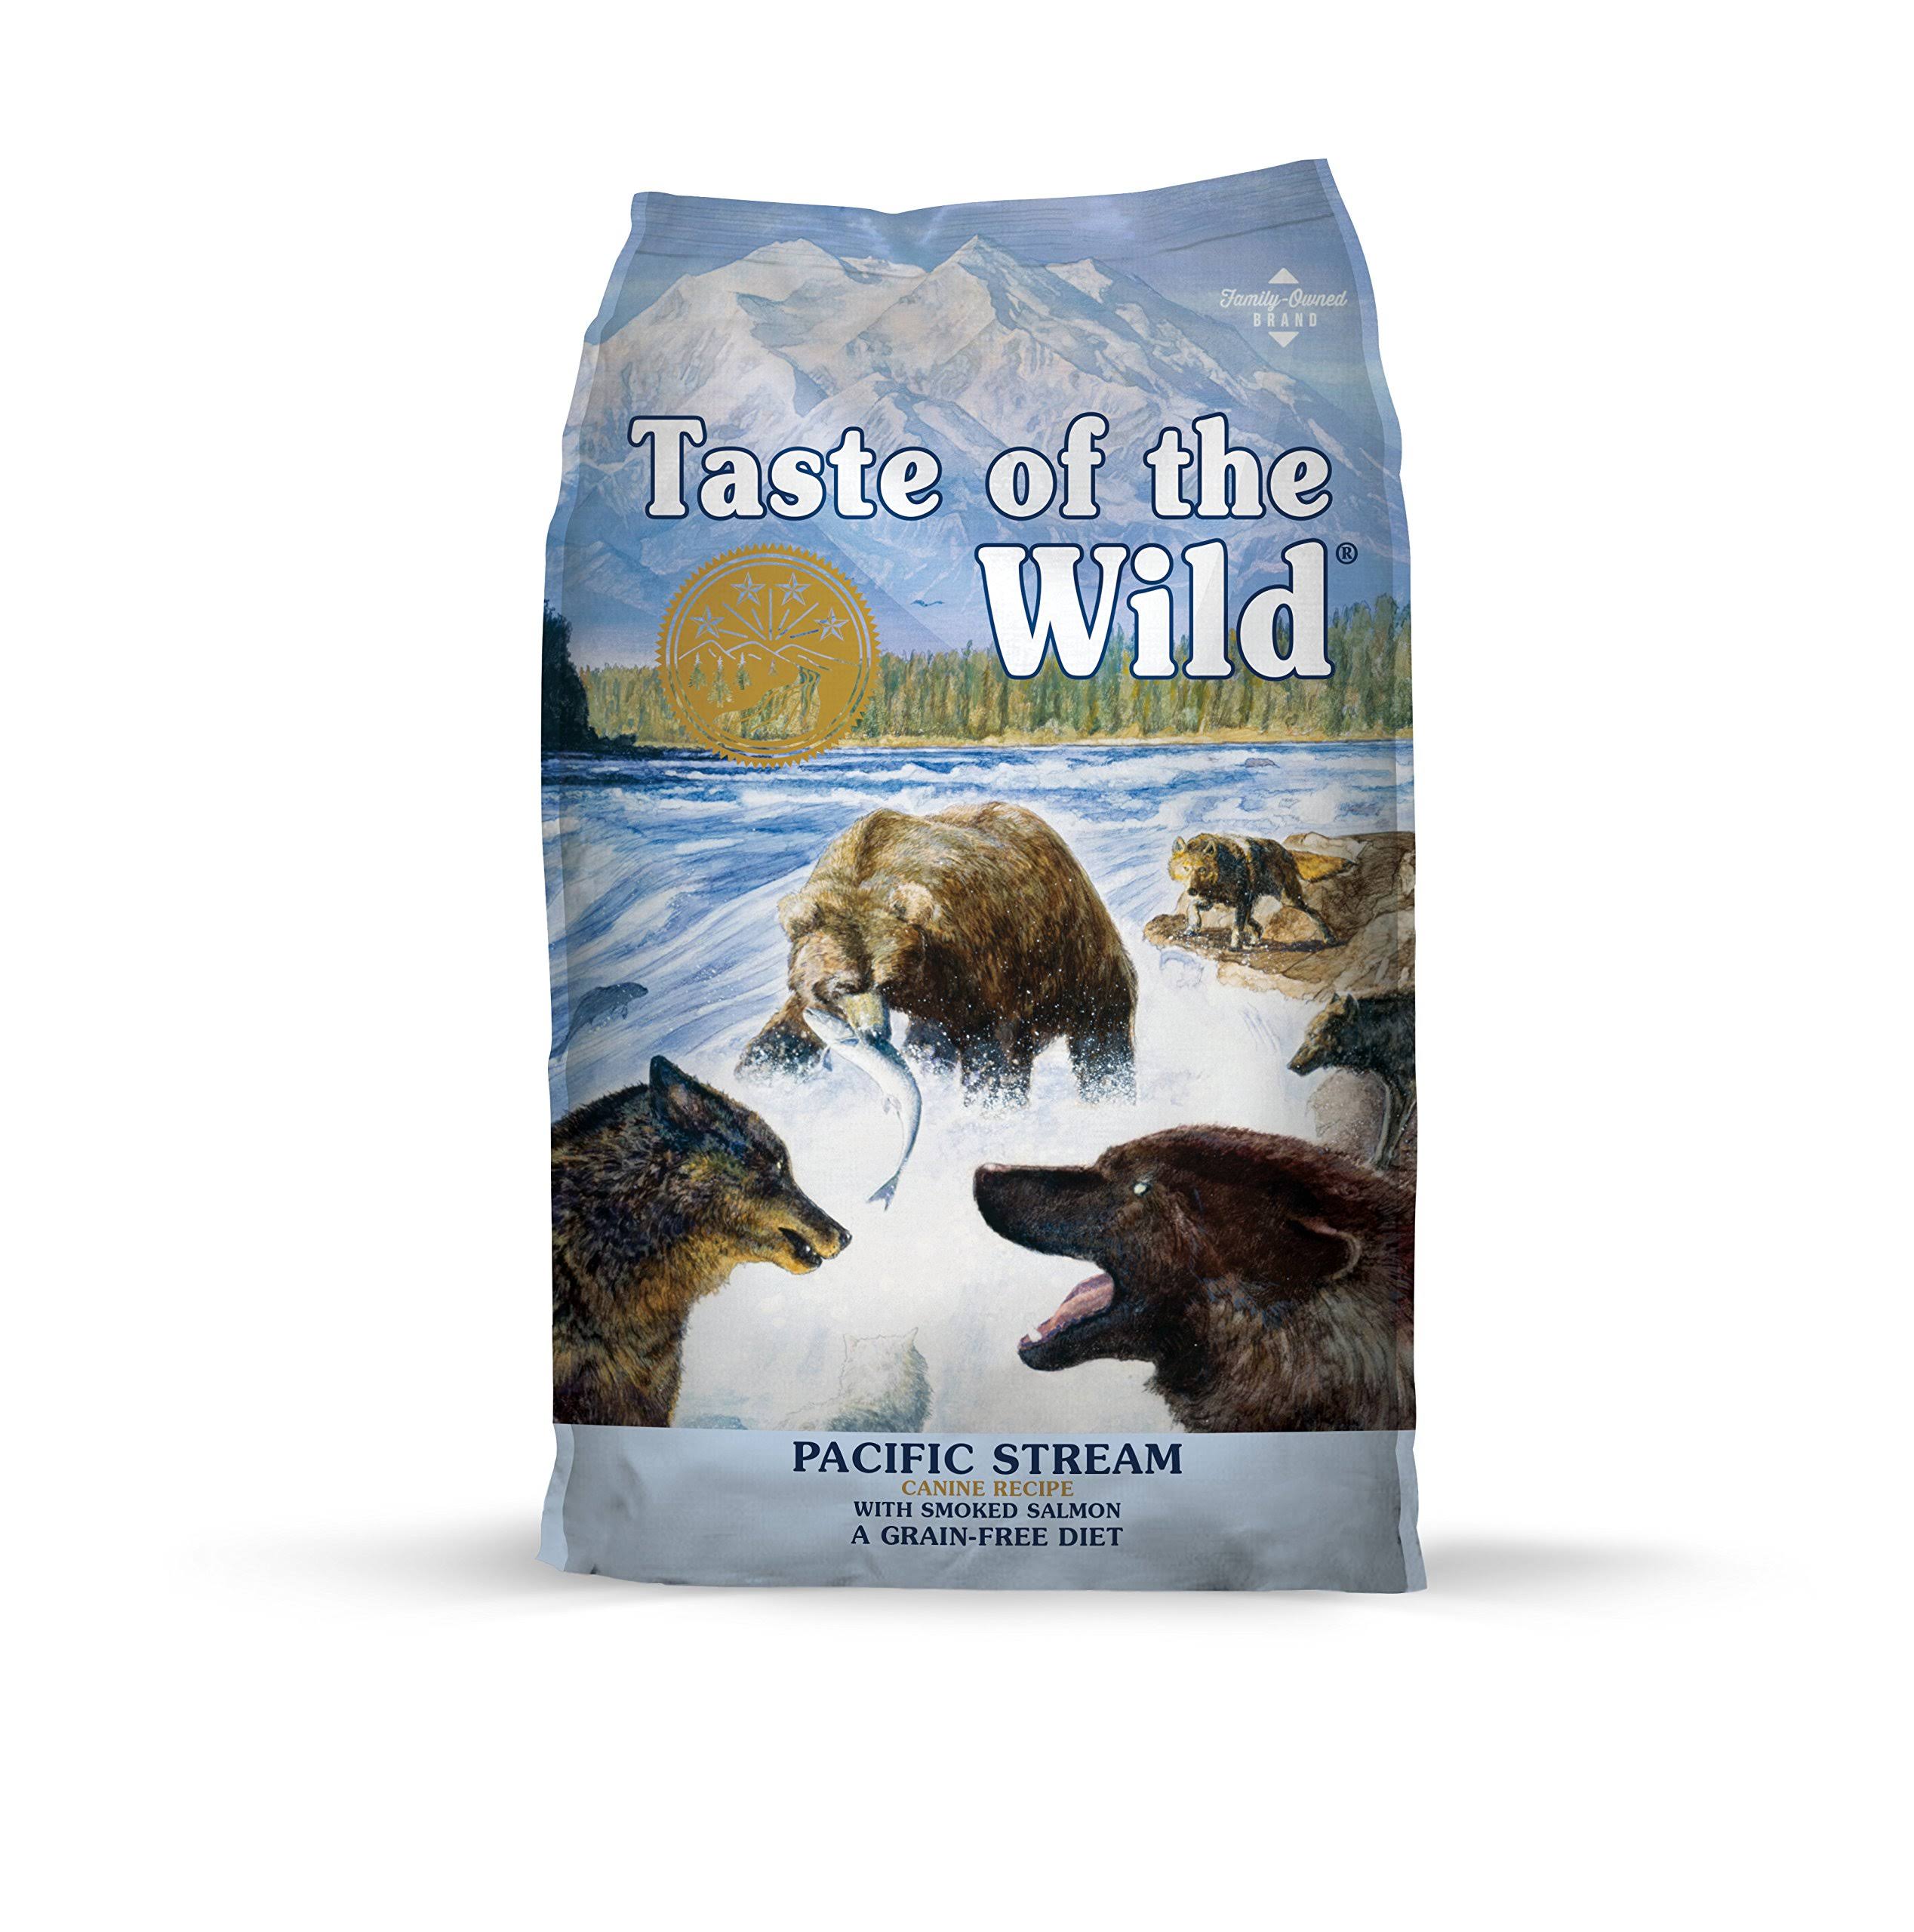 Taste of the Wild Dog Food - Pacific Stream Canine Formula, with Smoked Salmon, 30lb